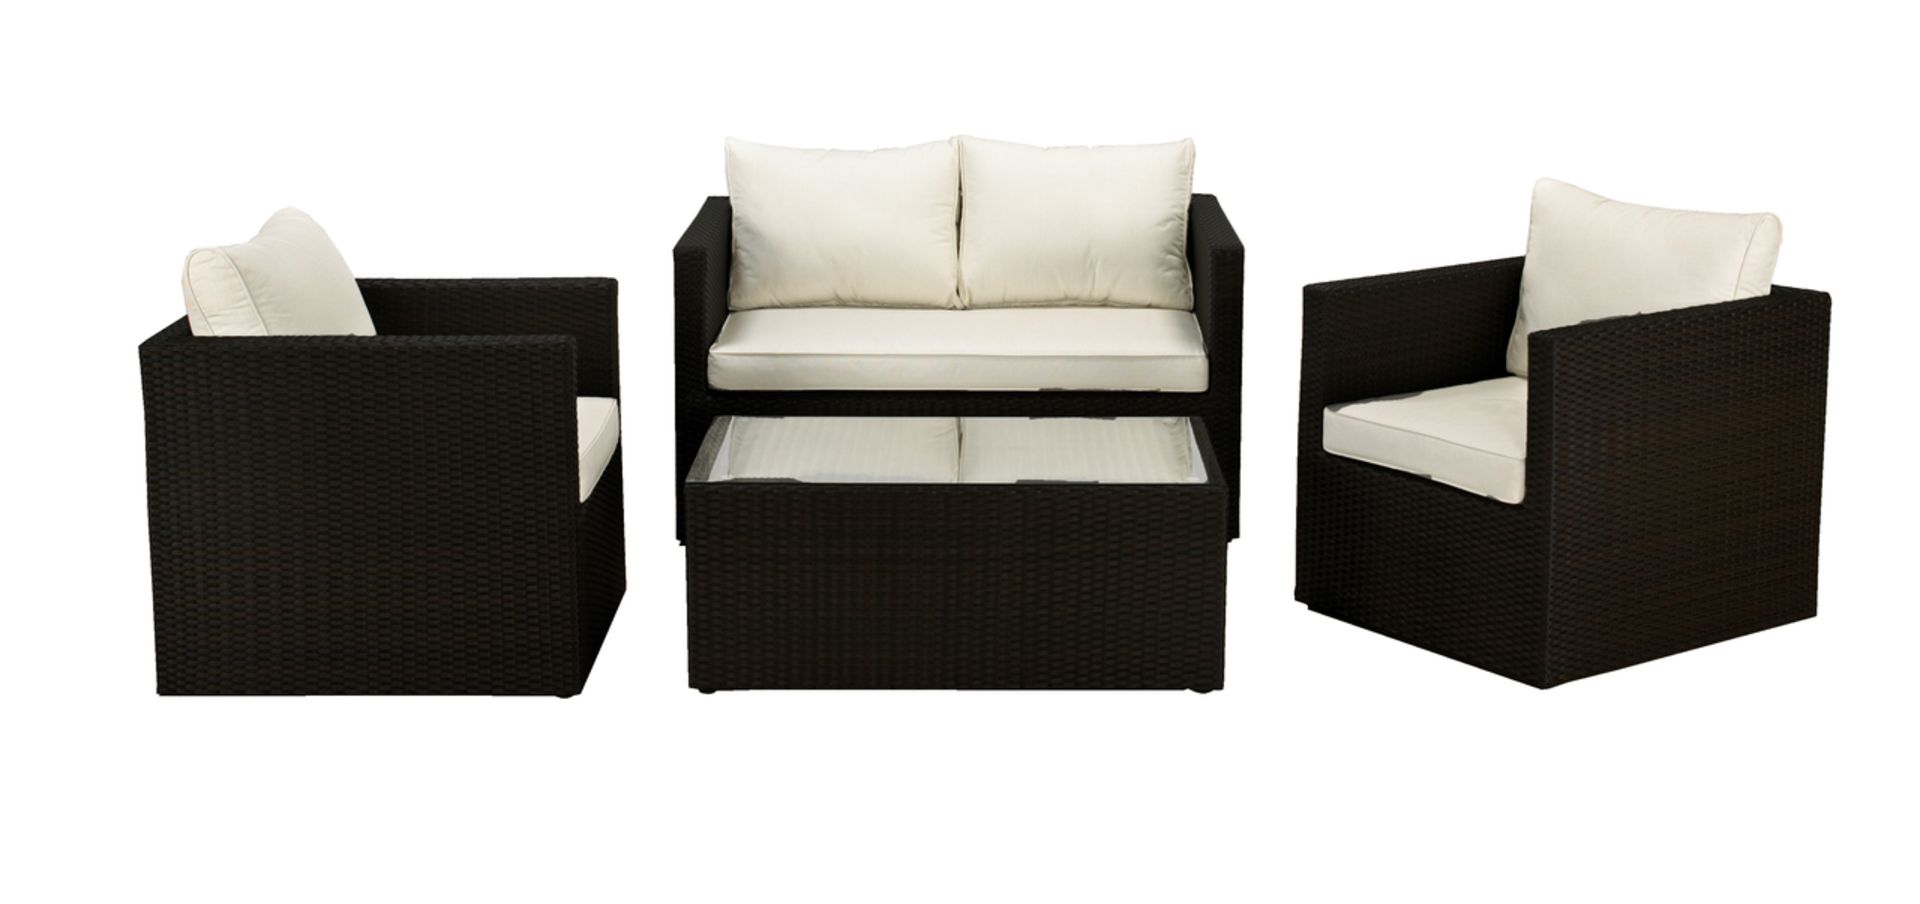 V Brand New Cannes Four Piece Sofa Lounge Set With Glass Top Coffee Table ISP £675 (Dunelm)